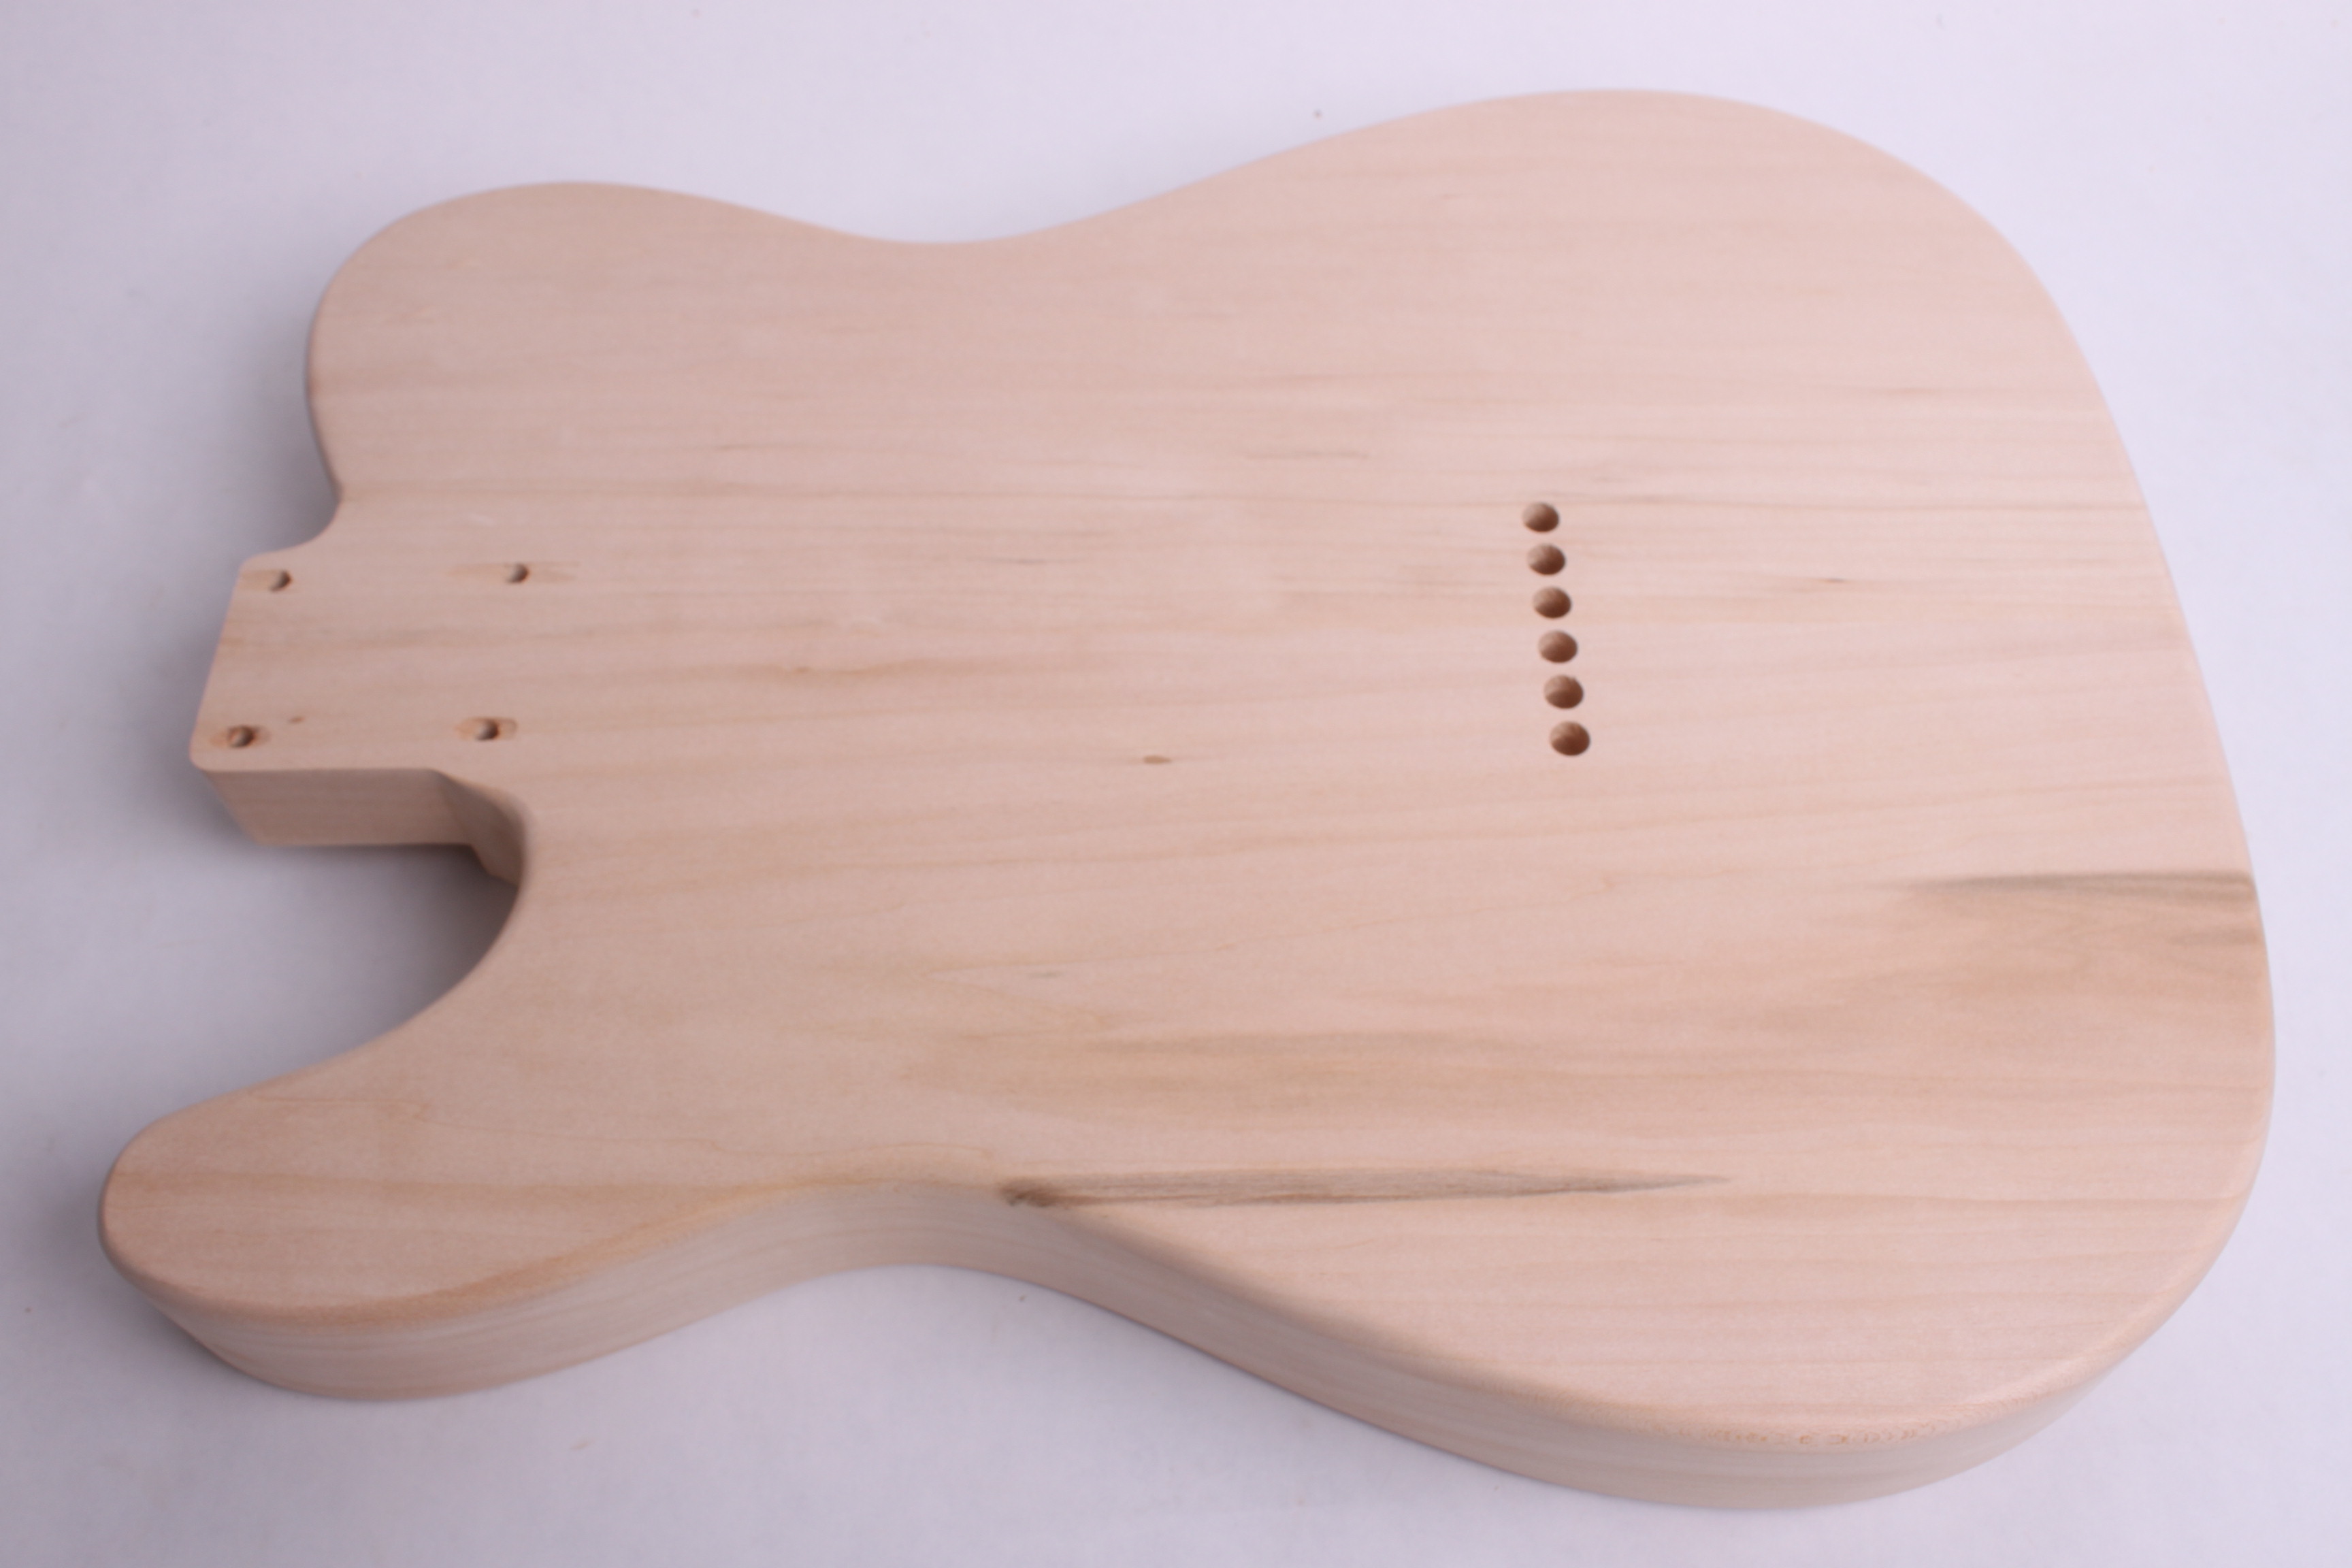 Basswood Body Blank - Guitar bodies and kits from BYOGuitar